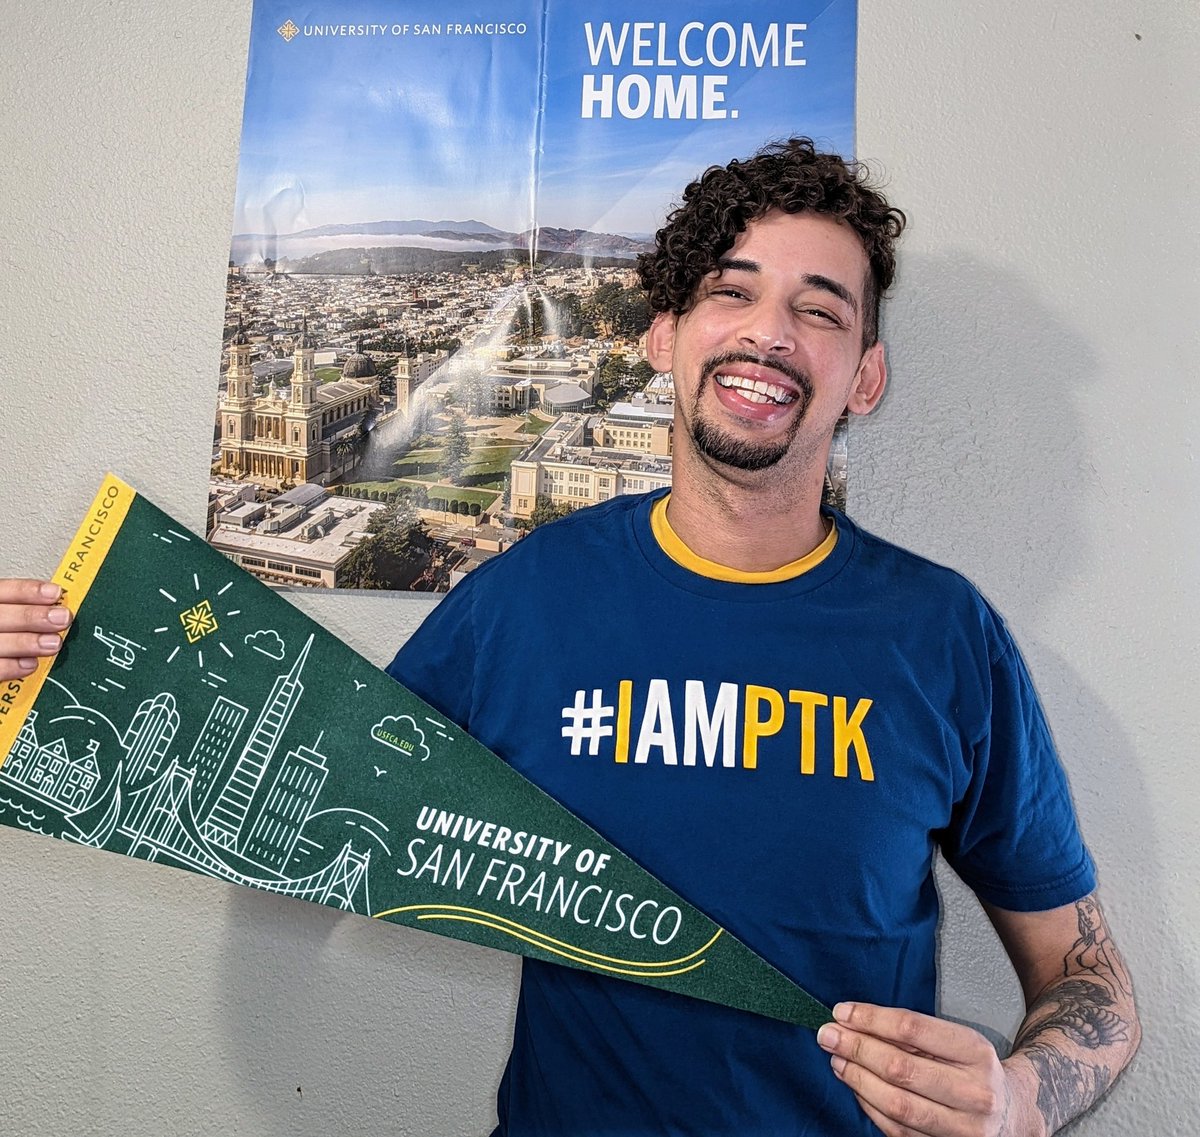 I'm officially a Don! So excited for this new adventure @usfca Beyond thankful for the resources and advice from @PHITHETAKAPPA and @HCCFL helping me through this transfer journey! @BetterMakeRoom #CollegeSigningDay #DayoftheDons #transferstudent #iamptk #ccsmart